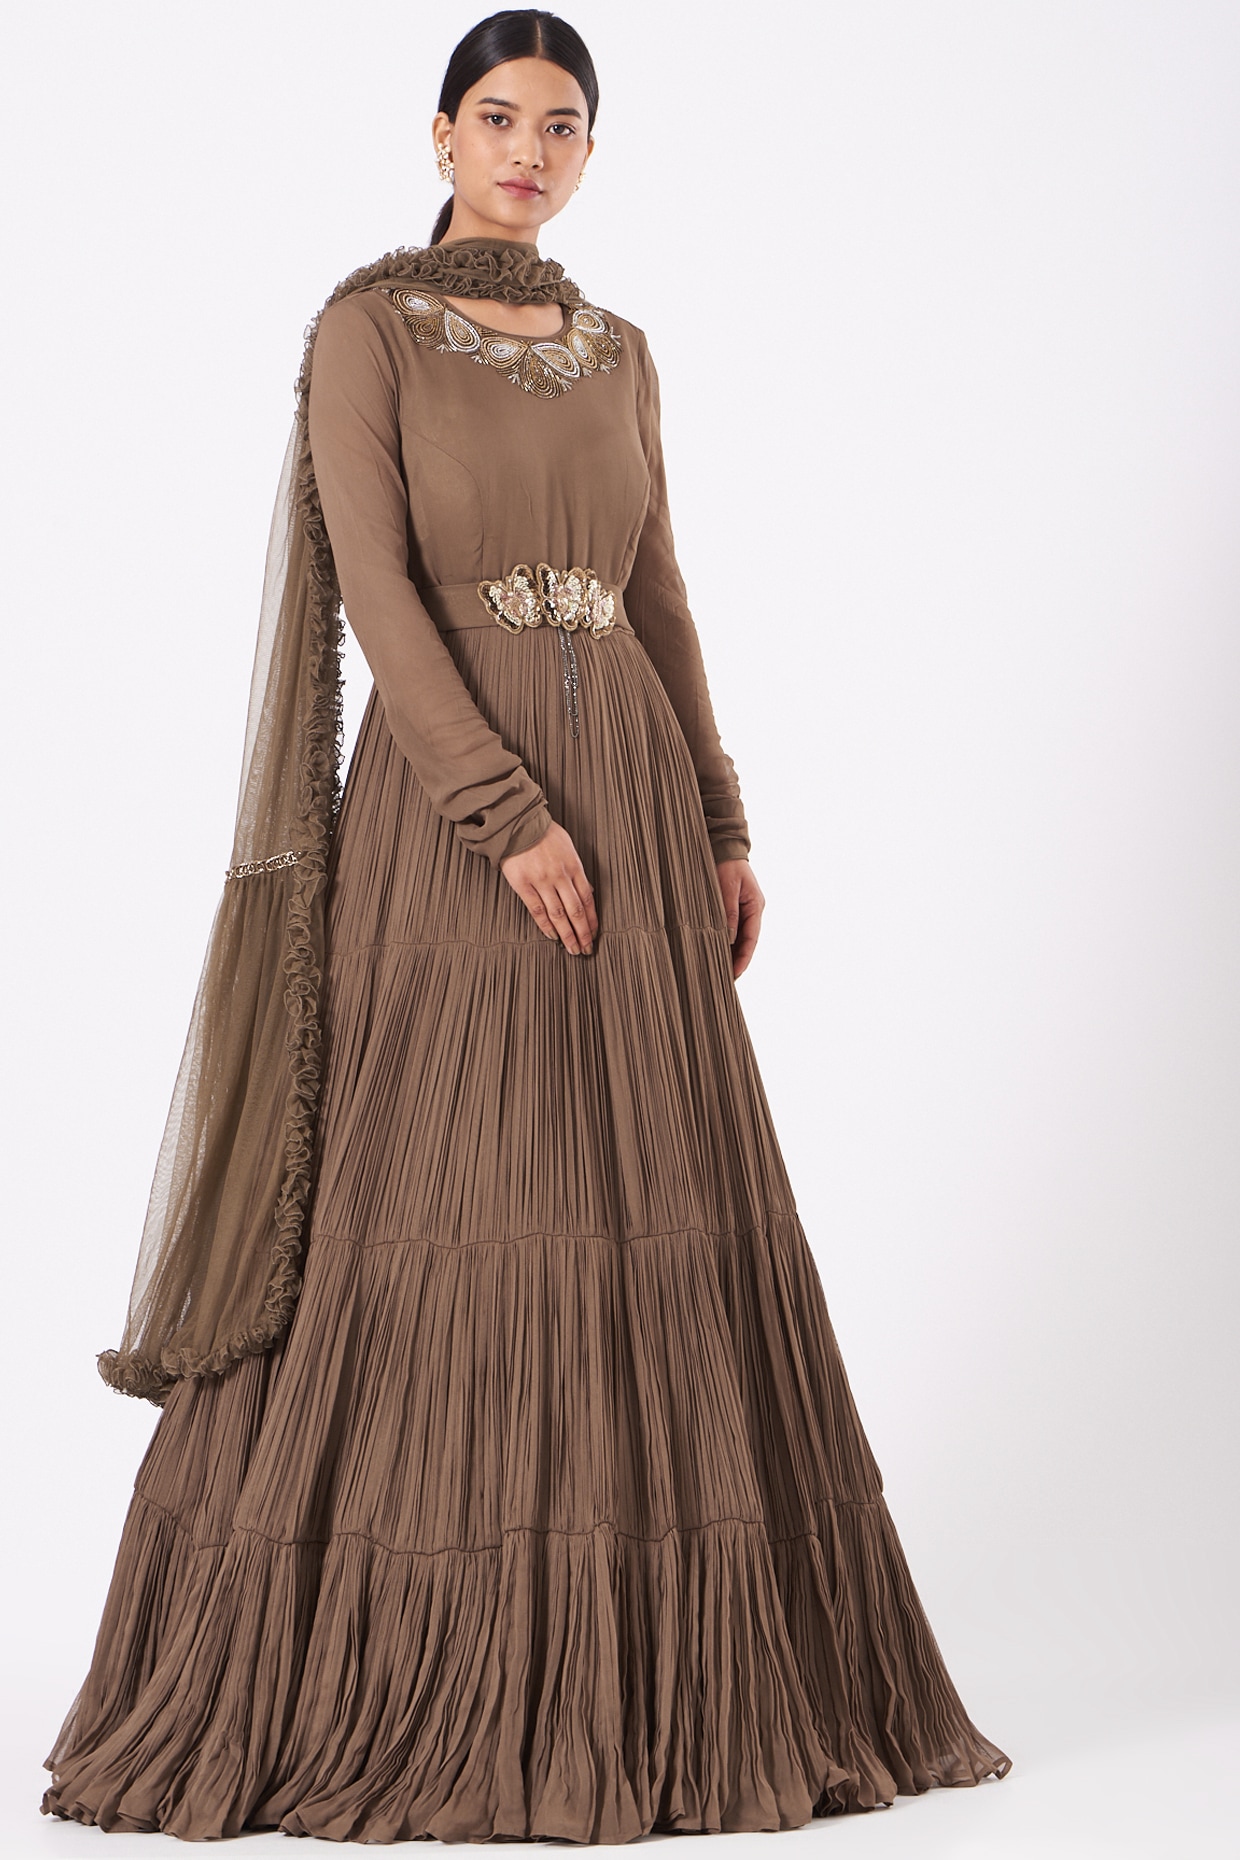 Gown : Brown heavy net embroidery and stone worked designer ...